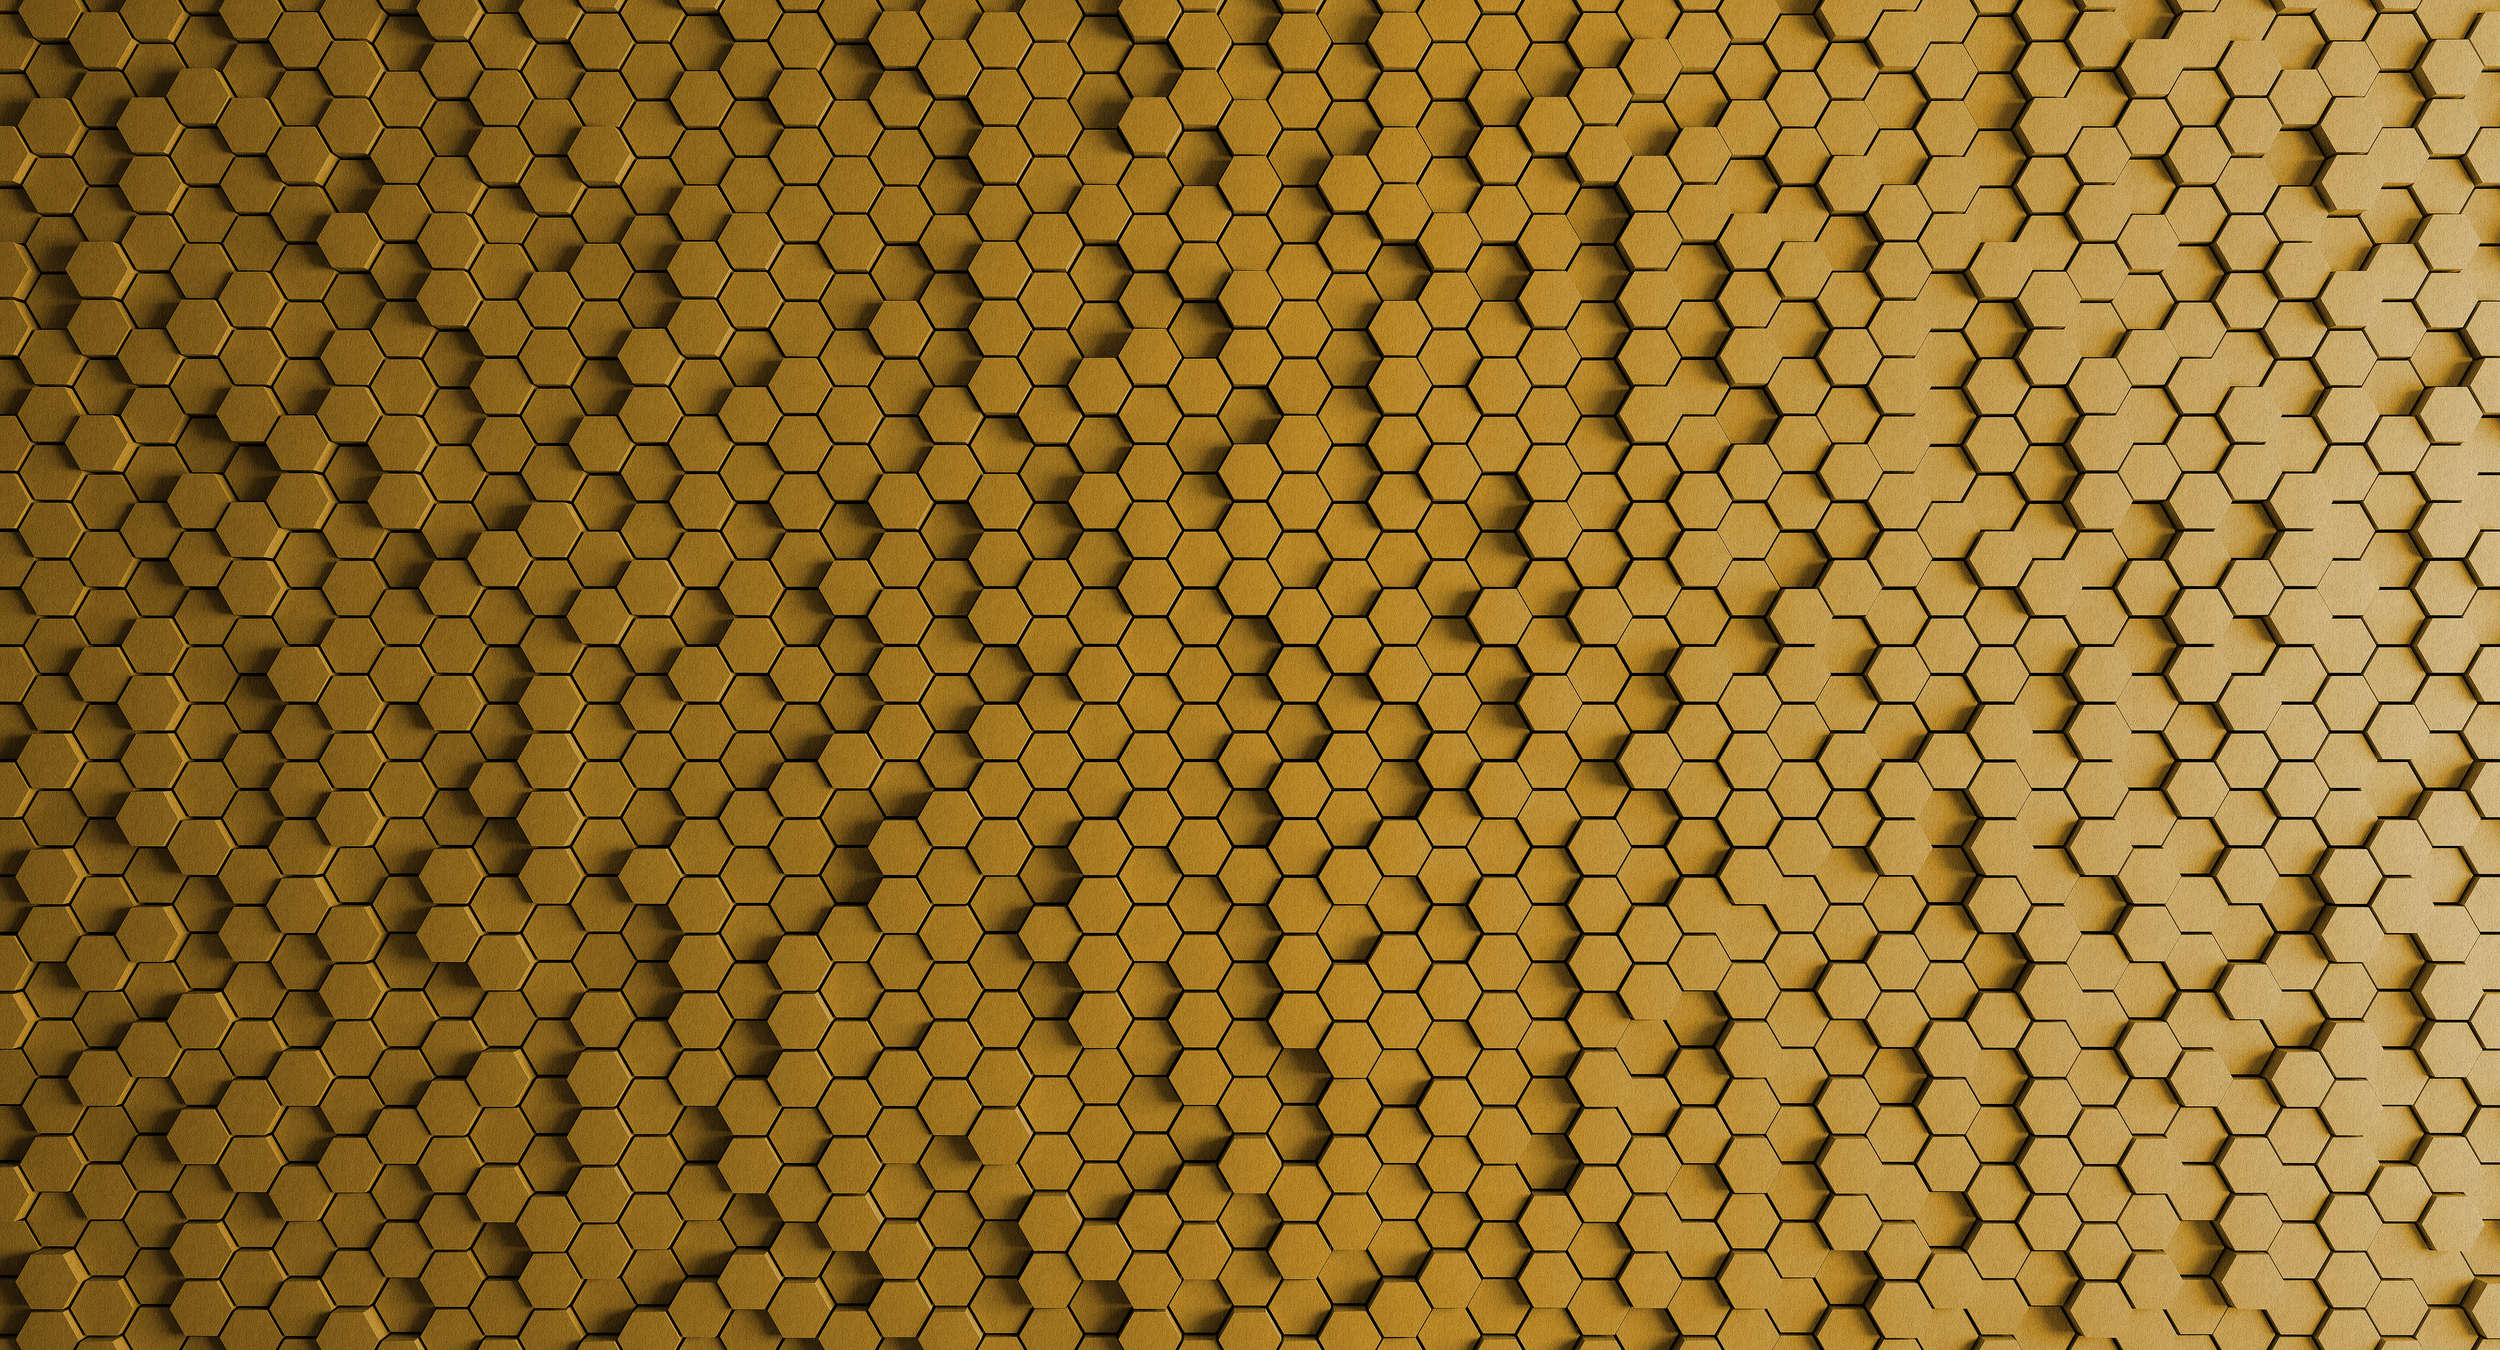             Honeycomb 1 - 3D wallpaper with yellow honeycomb design in felt structure - Yellow, Black | Pearl smooth fleece
        